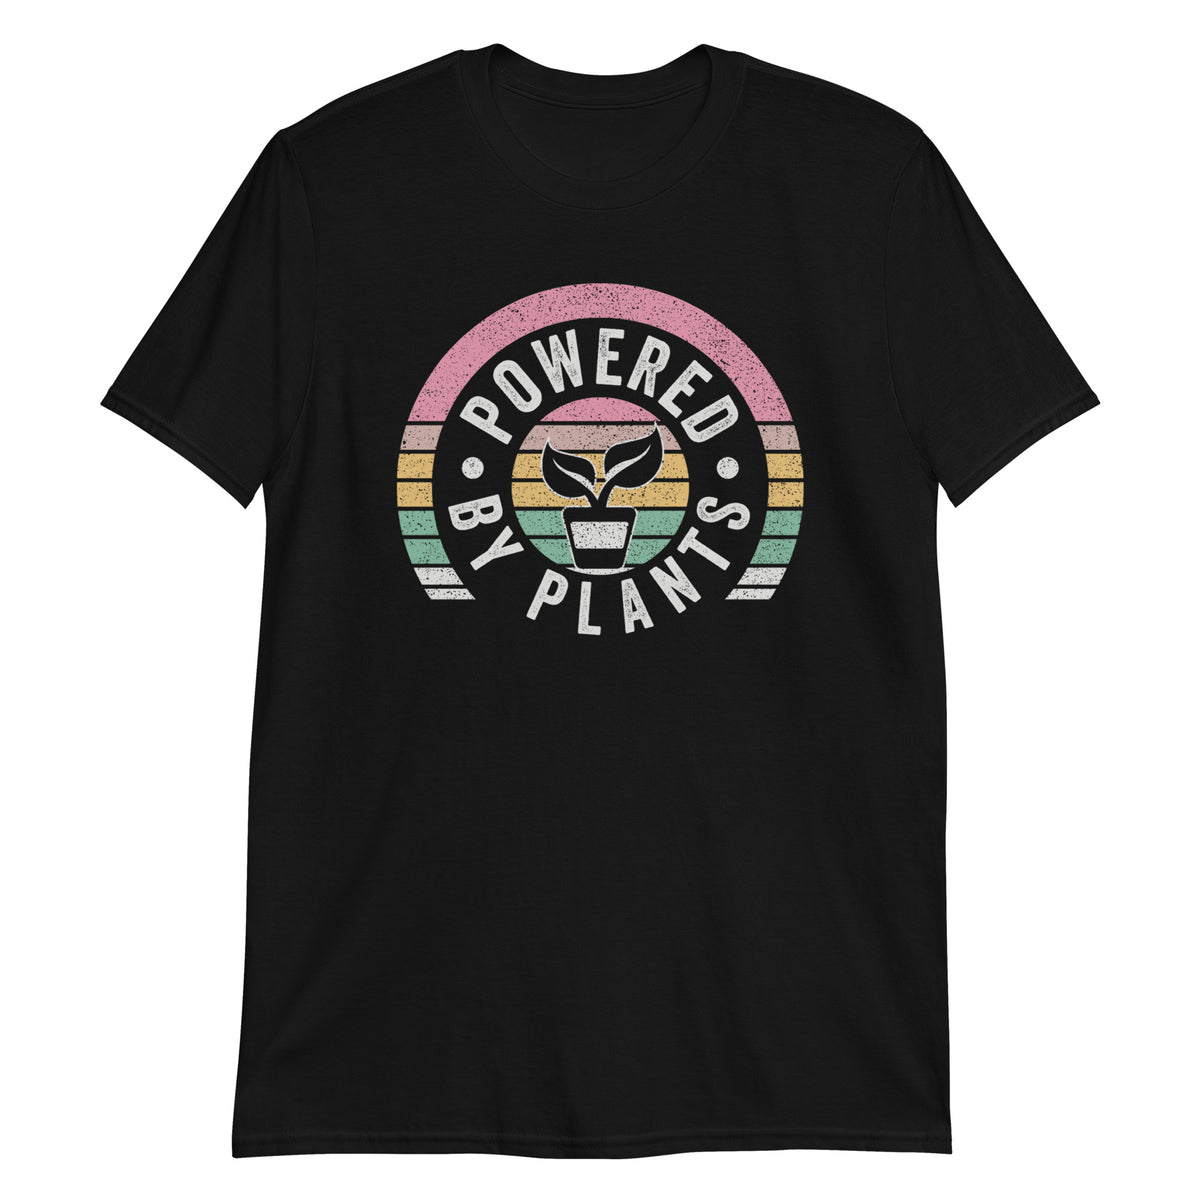 Powered By Plants T-Shirt